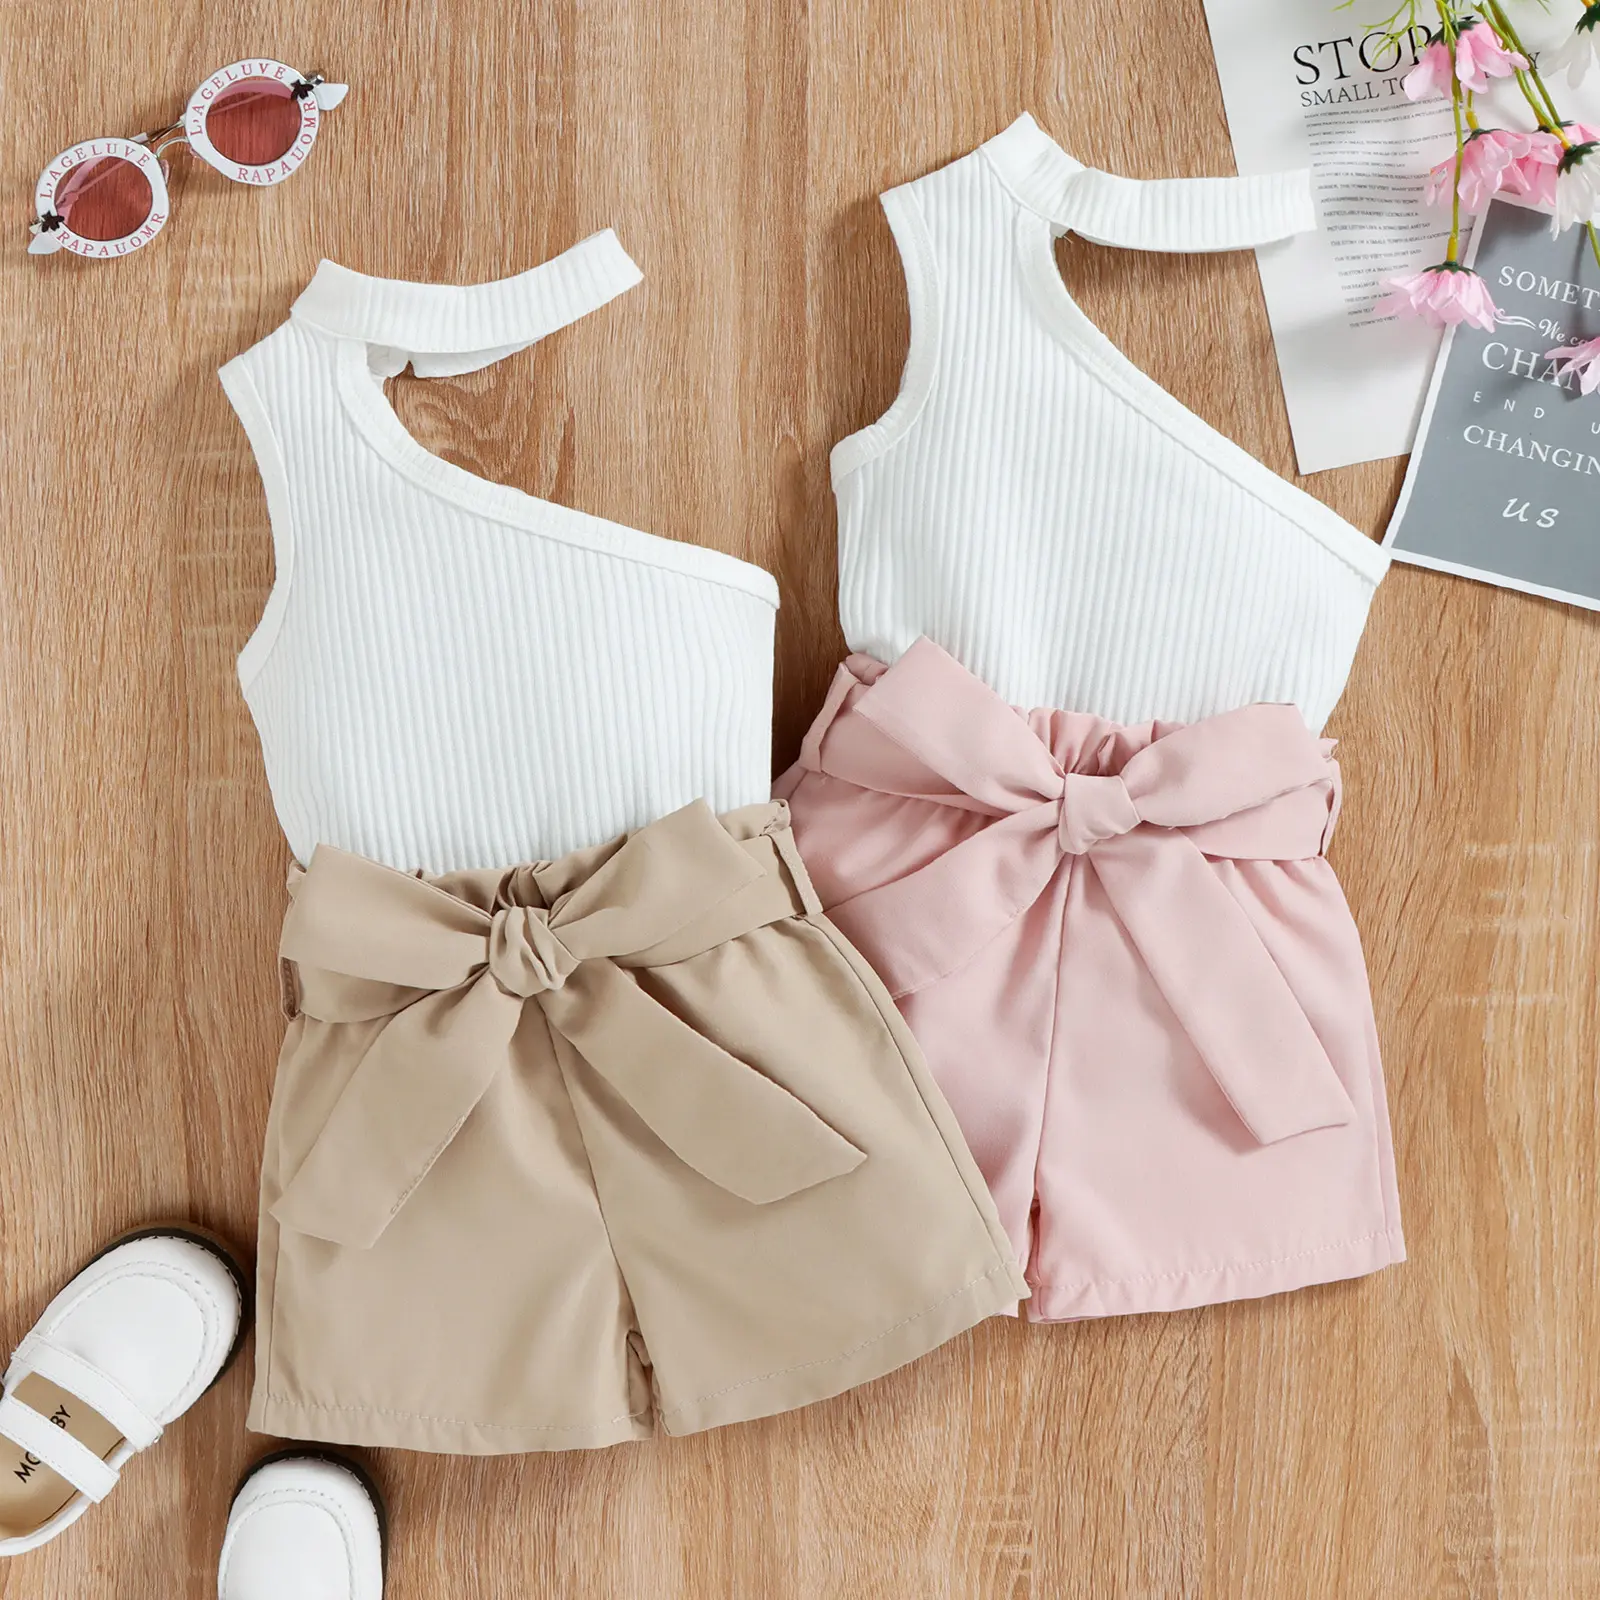 Boutique New Fashion One Shoulder White T Shirt Shorts Clothes Set Little Girls 2 Piece Outfits Girls' Clothing Set For Summer